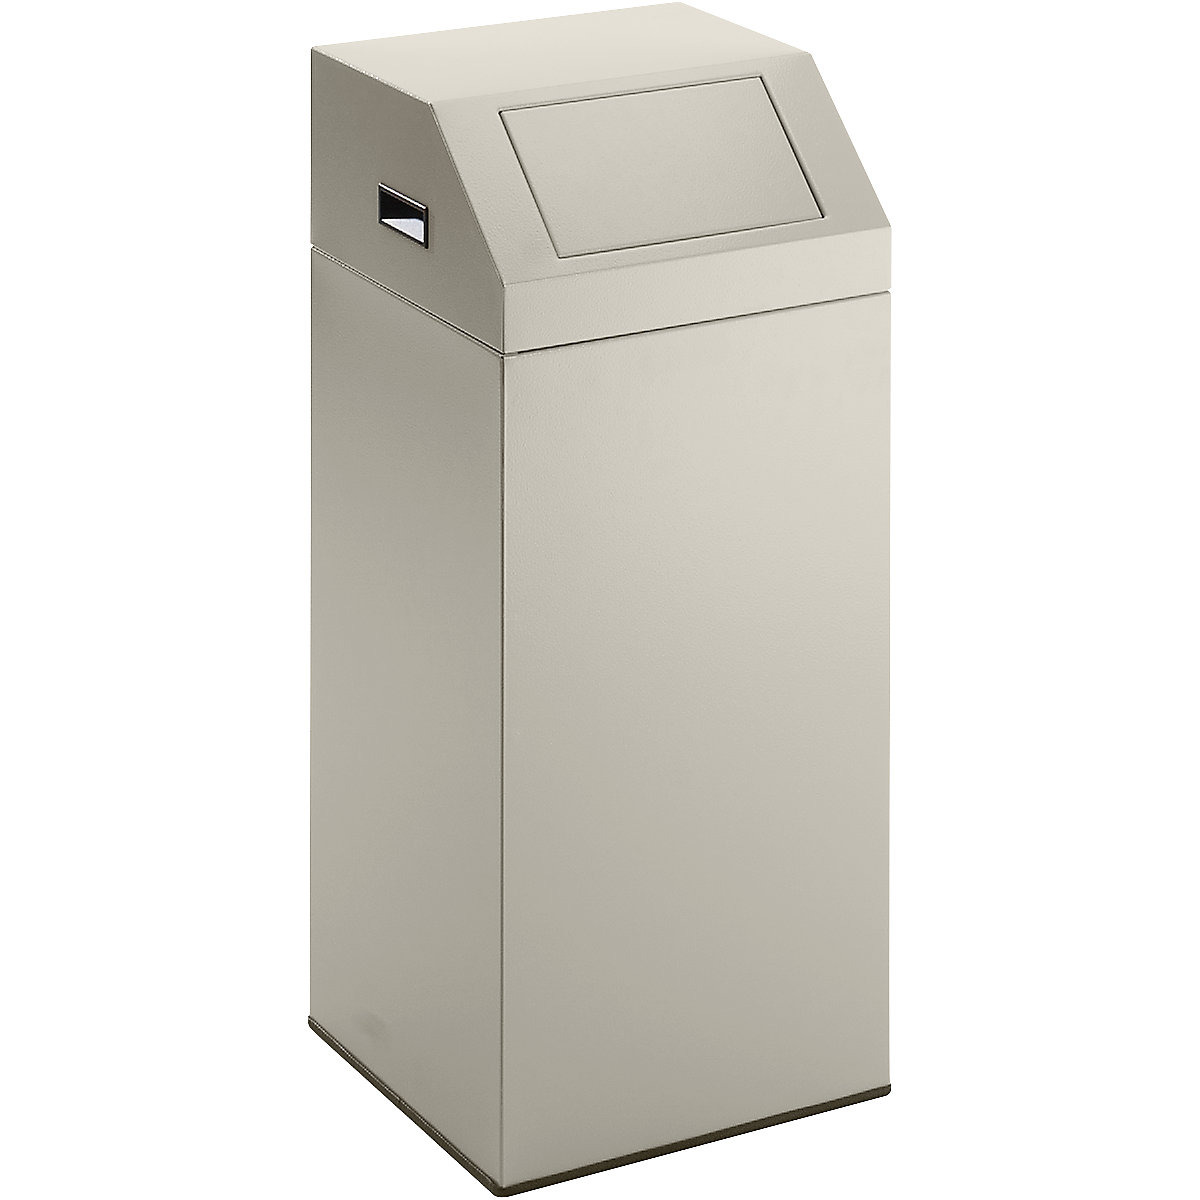 EUROKRAFTpro – Recyclable waste collector, capacity 76 l, WxHxD 380 x 890 x 380 mm, pebble grey